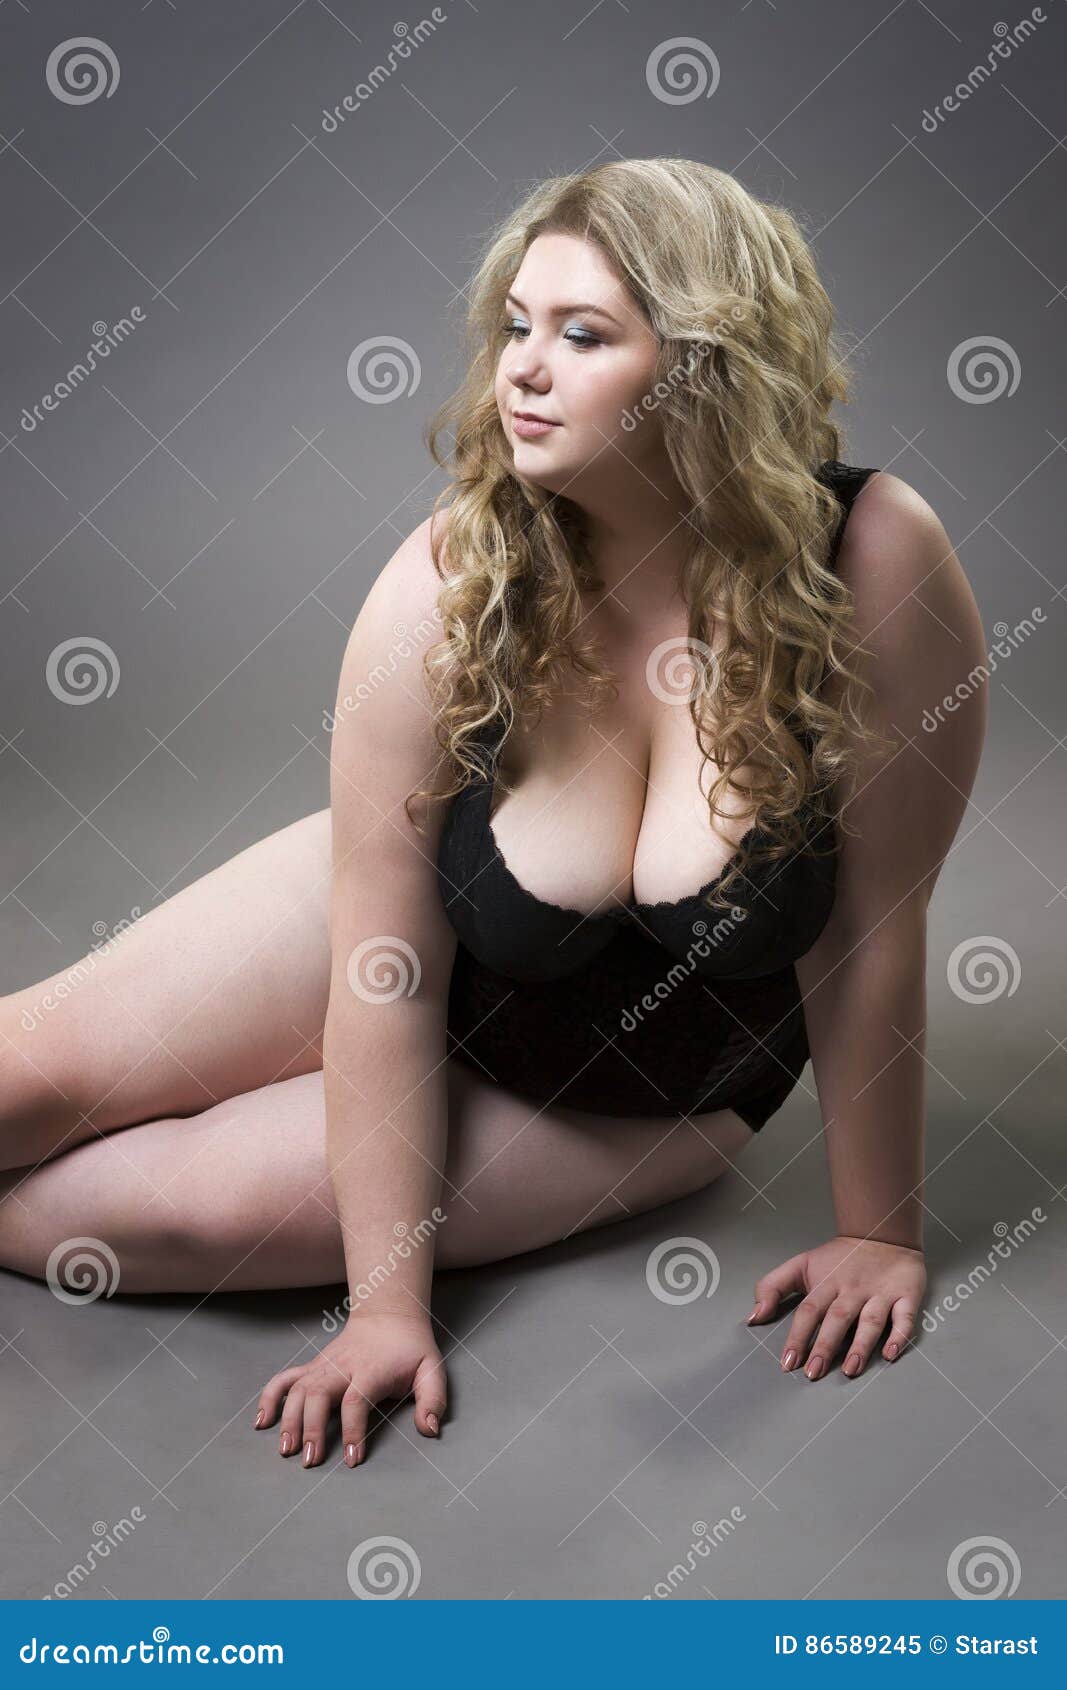 Young Beautiful Blonde Plus Size Model with Big Natural Breasts in Underwear, Xxl Woman on Gray Studio Background Stock Image